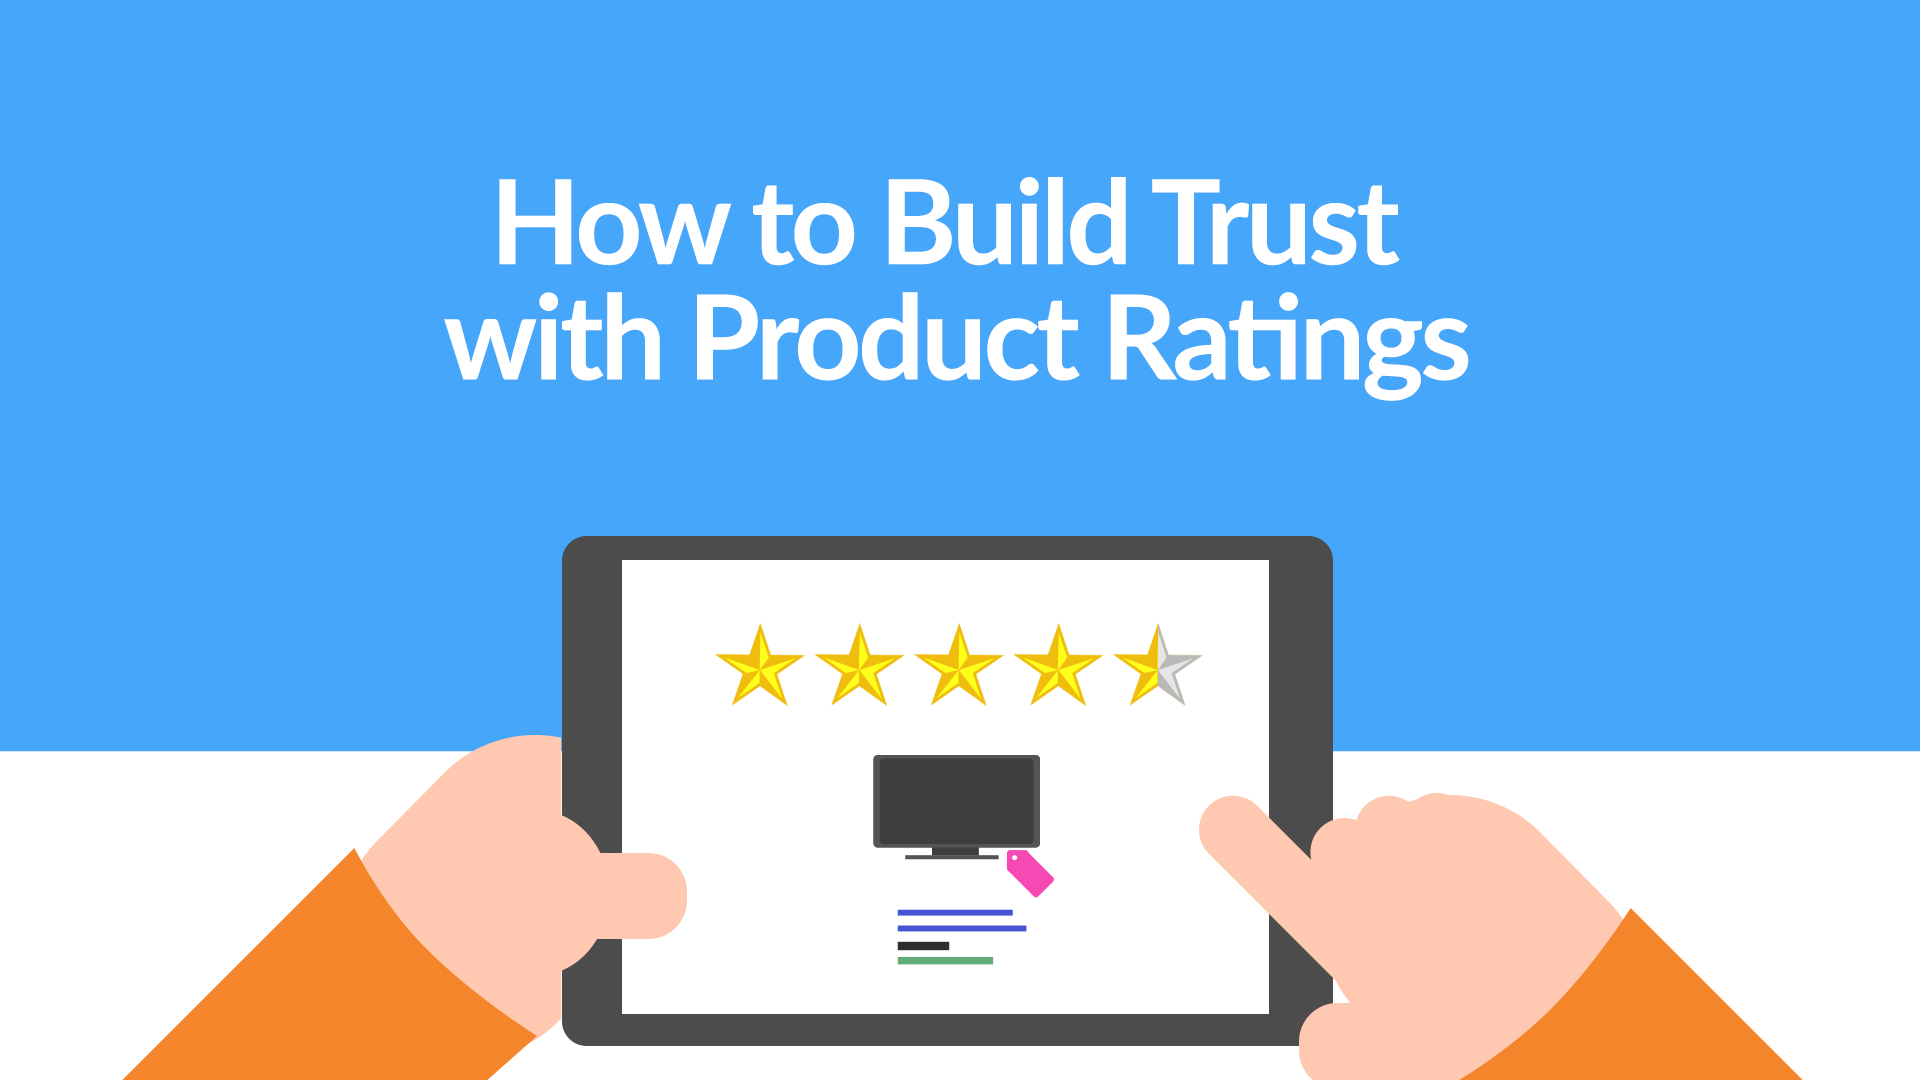 Product rating